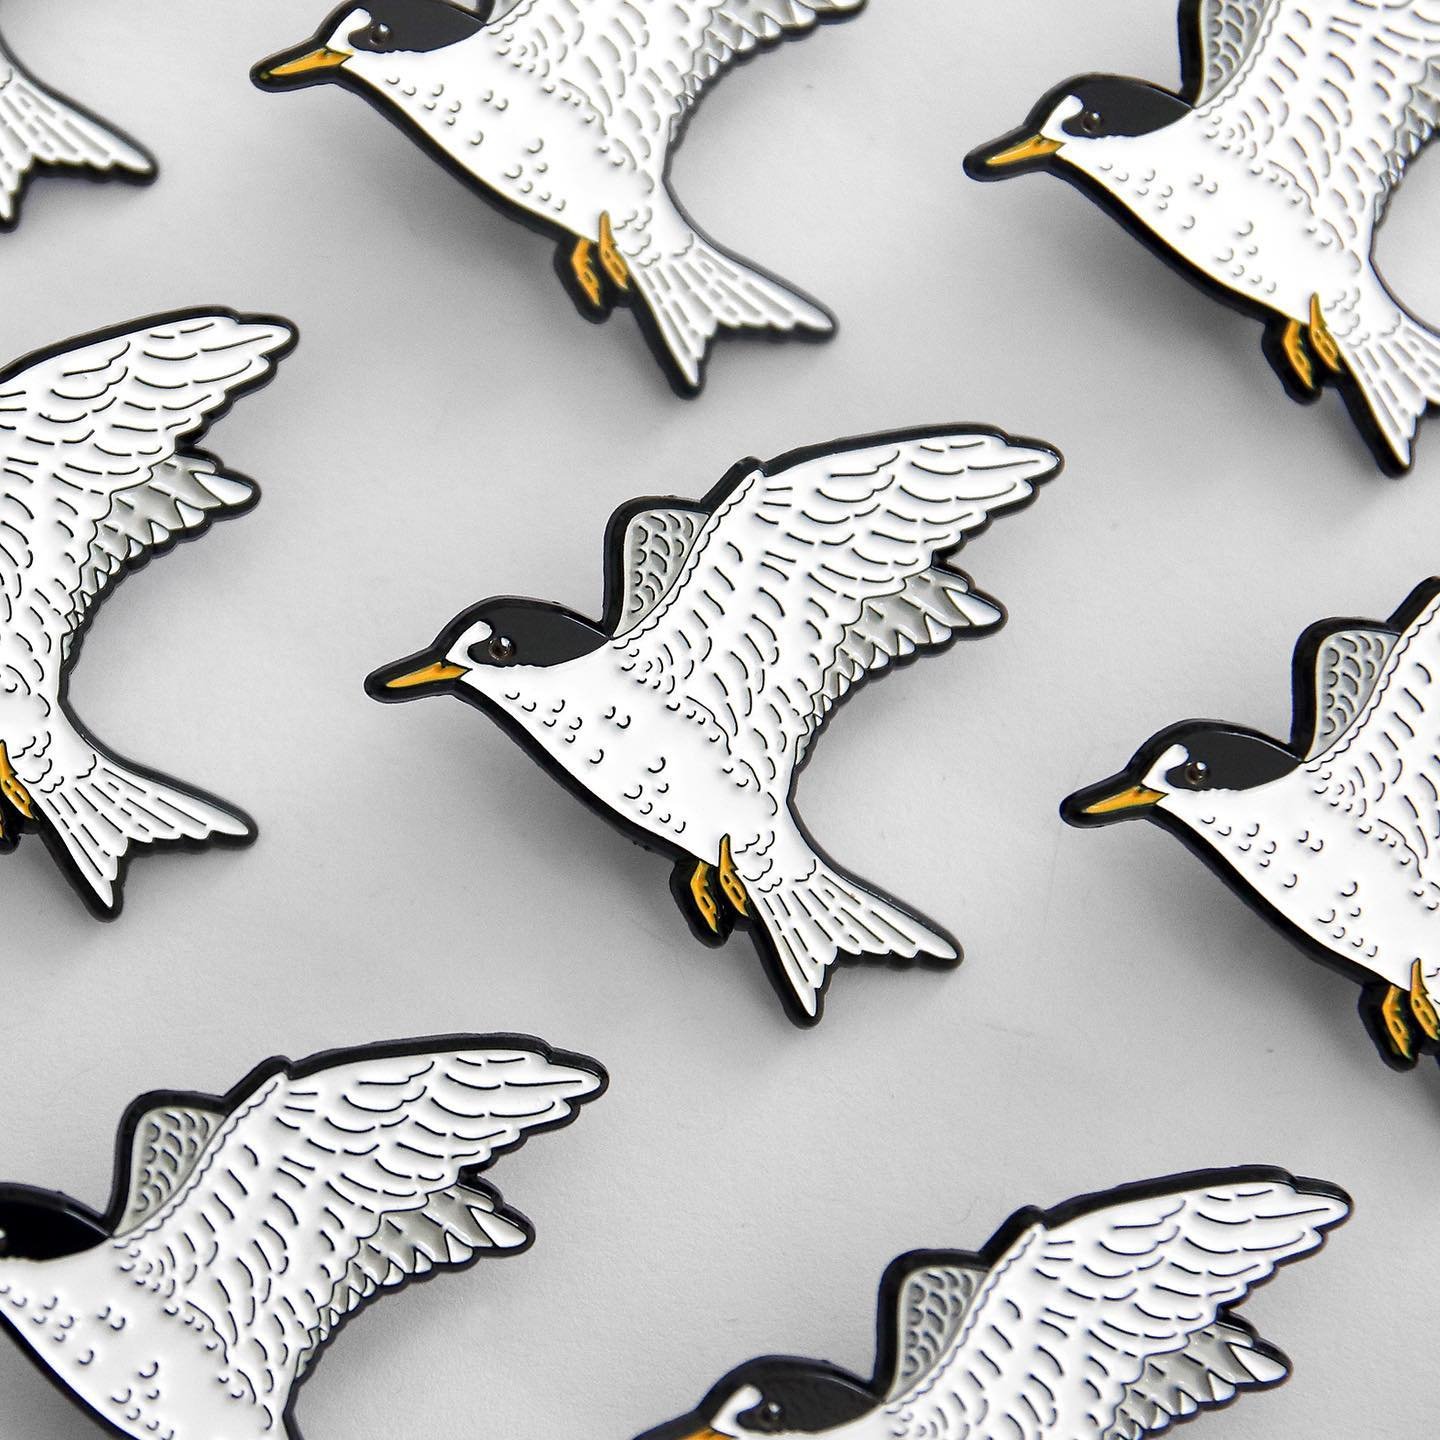 Tara iti pins are almost ready to take off&hellip;

These sweet tara iti / fairy tern enamel pins will be available on my website from this Wednesday the 8th at 6pm 🤍

For 2 weeks I&rsquo;ll be donating $5 from every tara iti pin sold to the NZ Fair